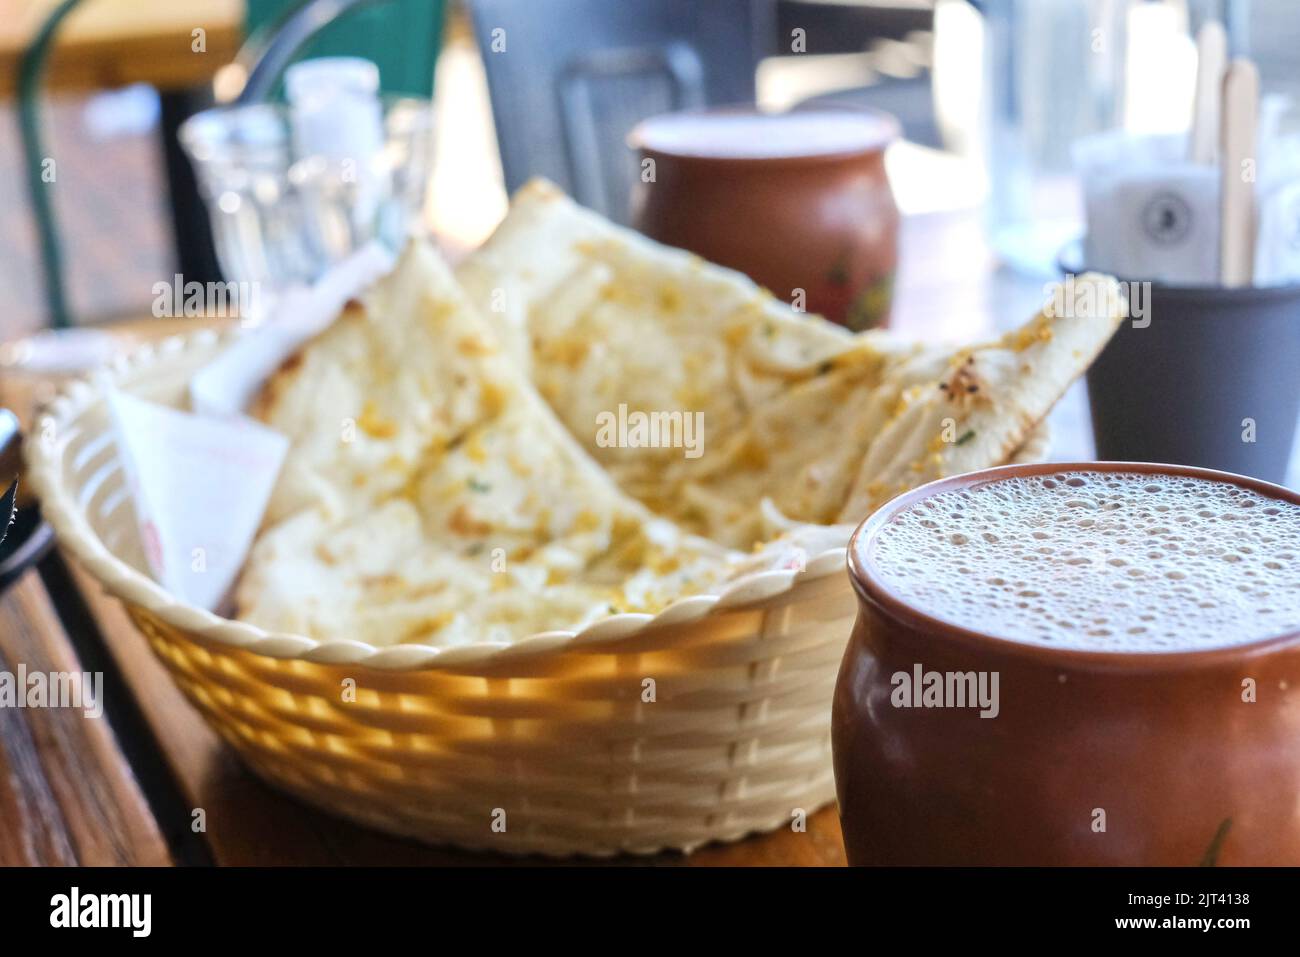 Two clay cups of masala chai and a basket of garlic naan at Chatkazz, a Mumbai-style street food restaurant in Harris Park — Sydney, Australia Stock Photo